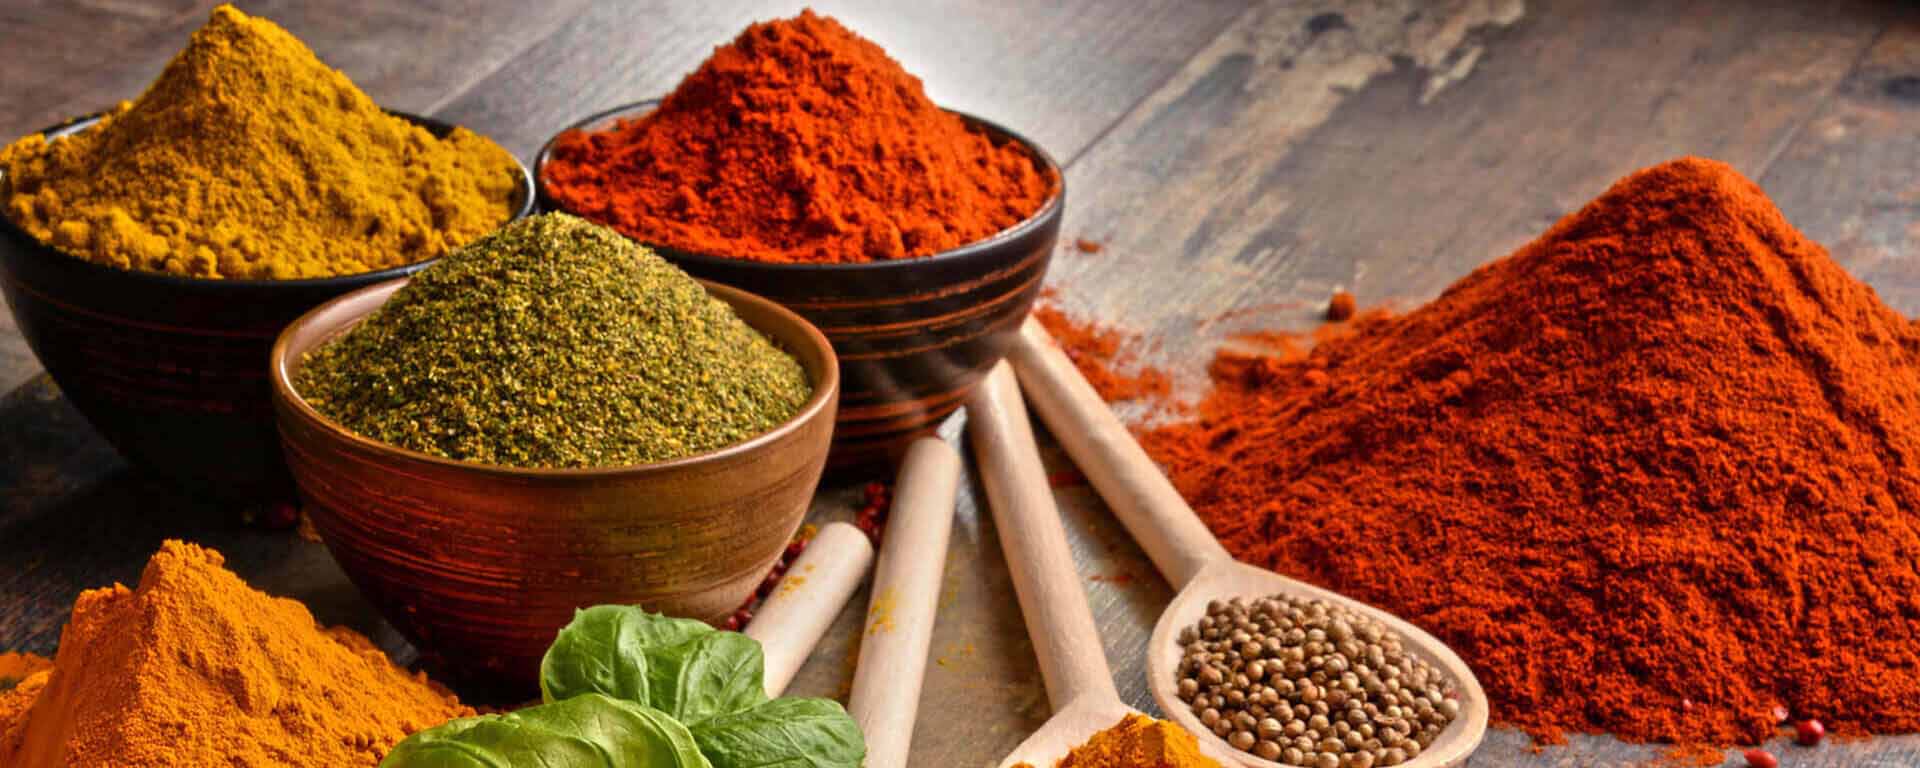 list of spice manufacturers in india